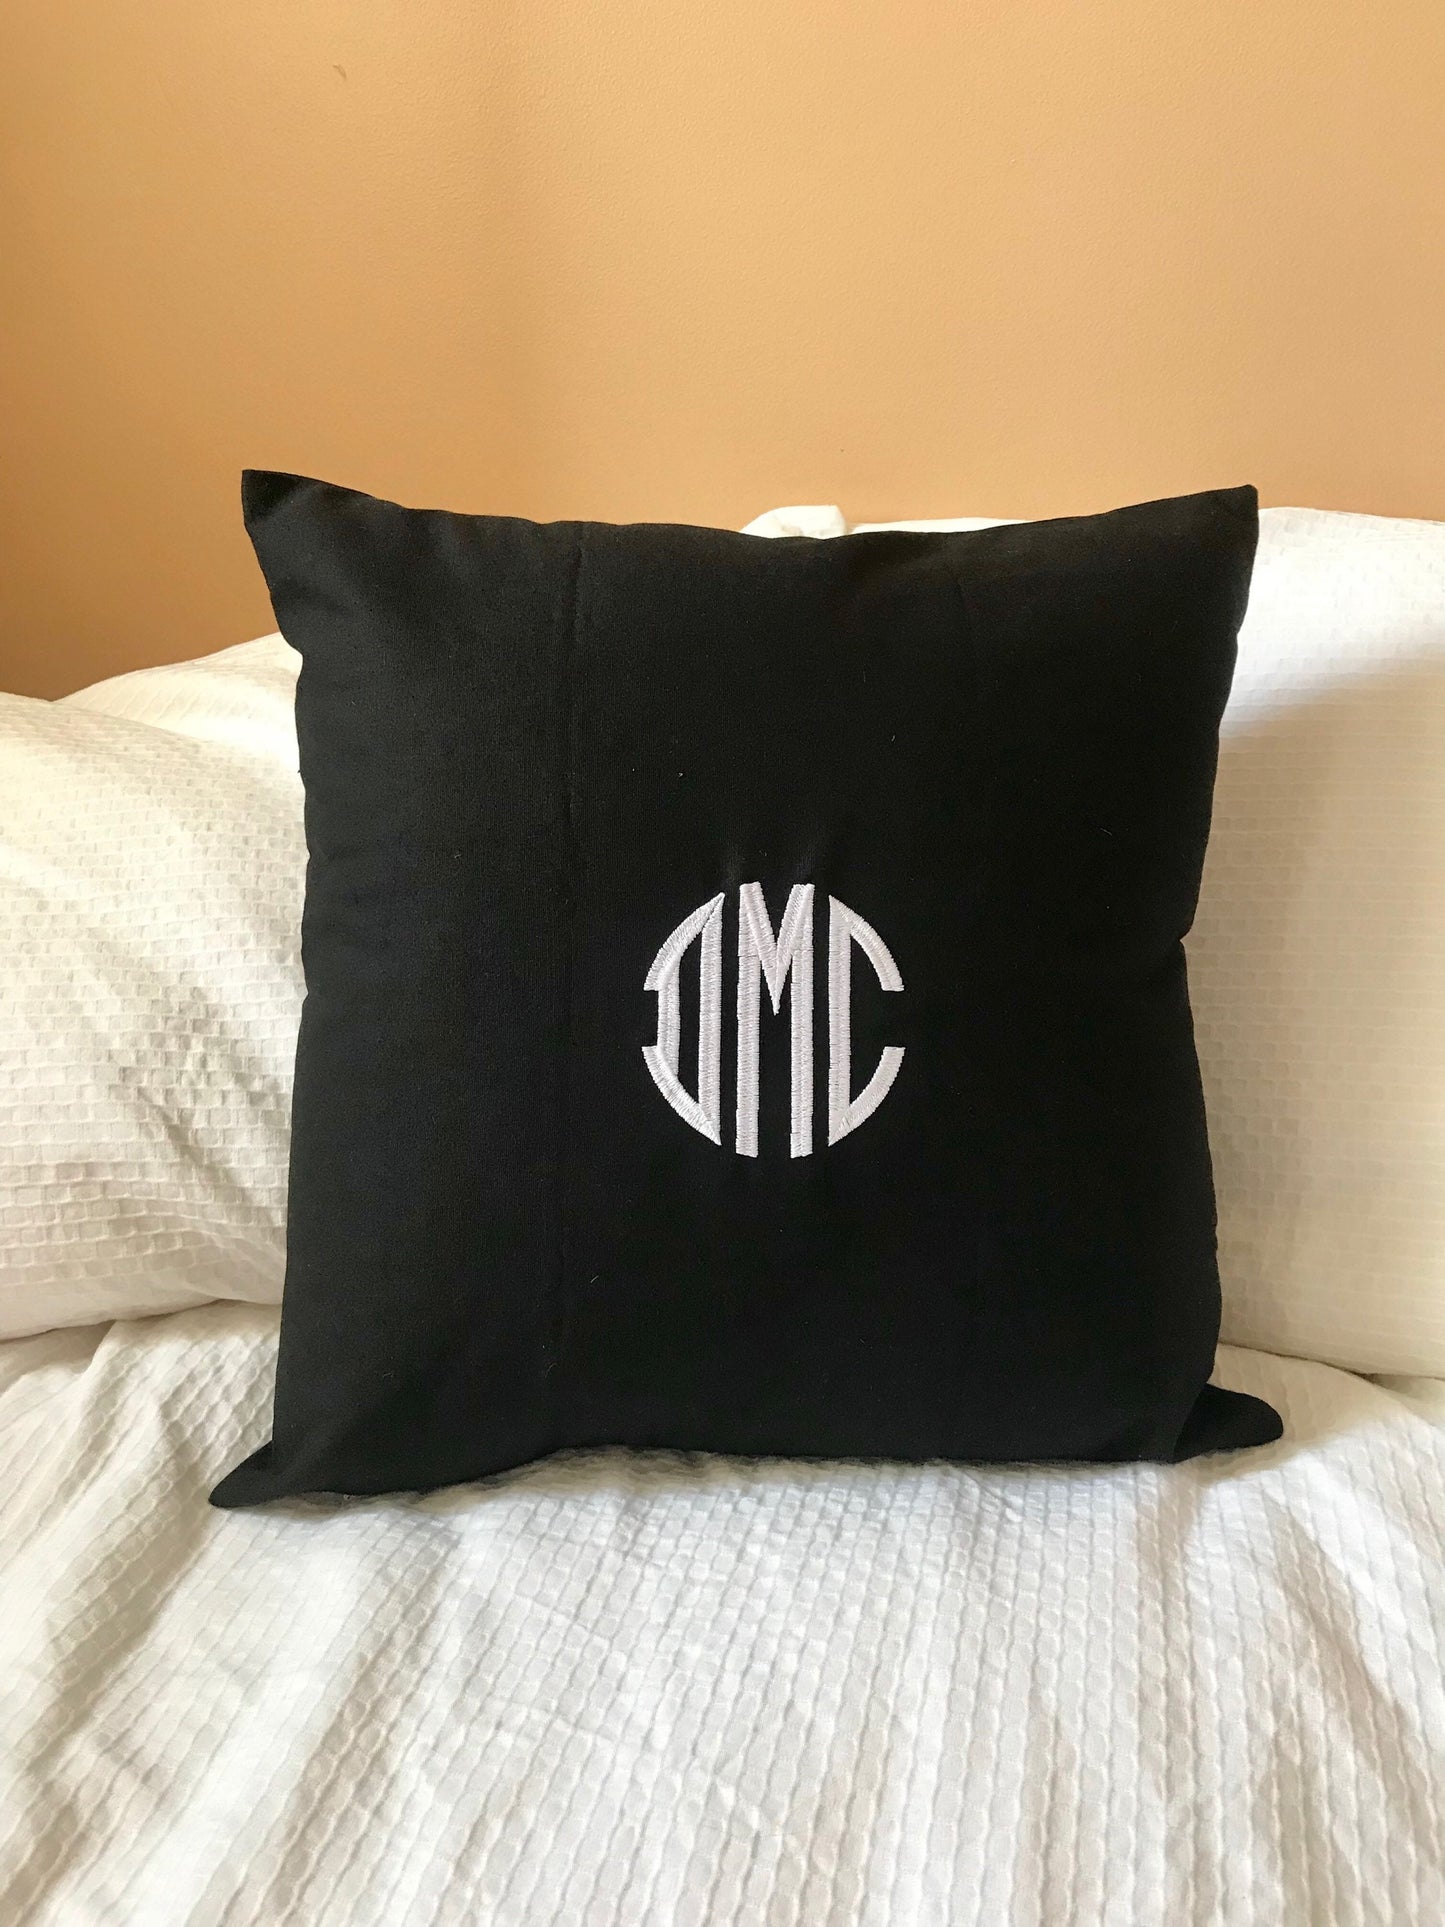 Embroidered - Monogrammed Pillow Sham - Customized - Personalized Gift Idea - Cotton Canvas